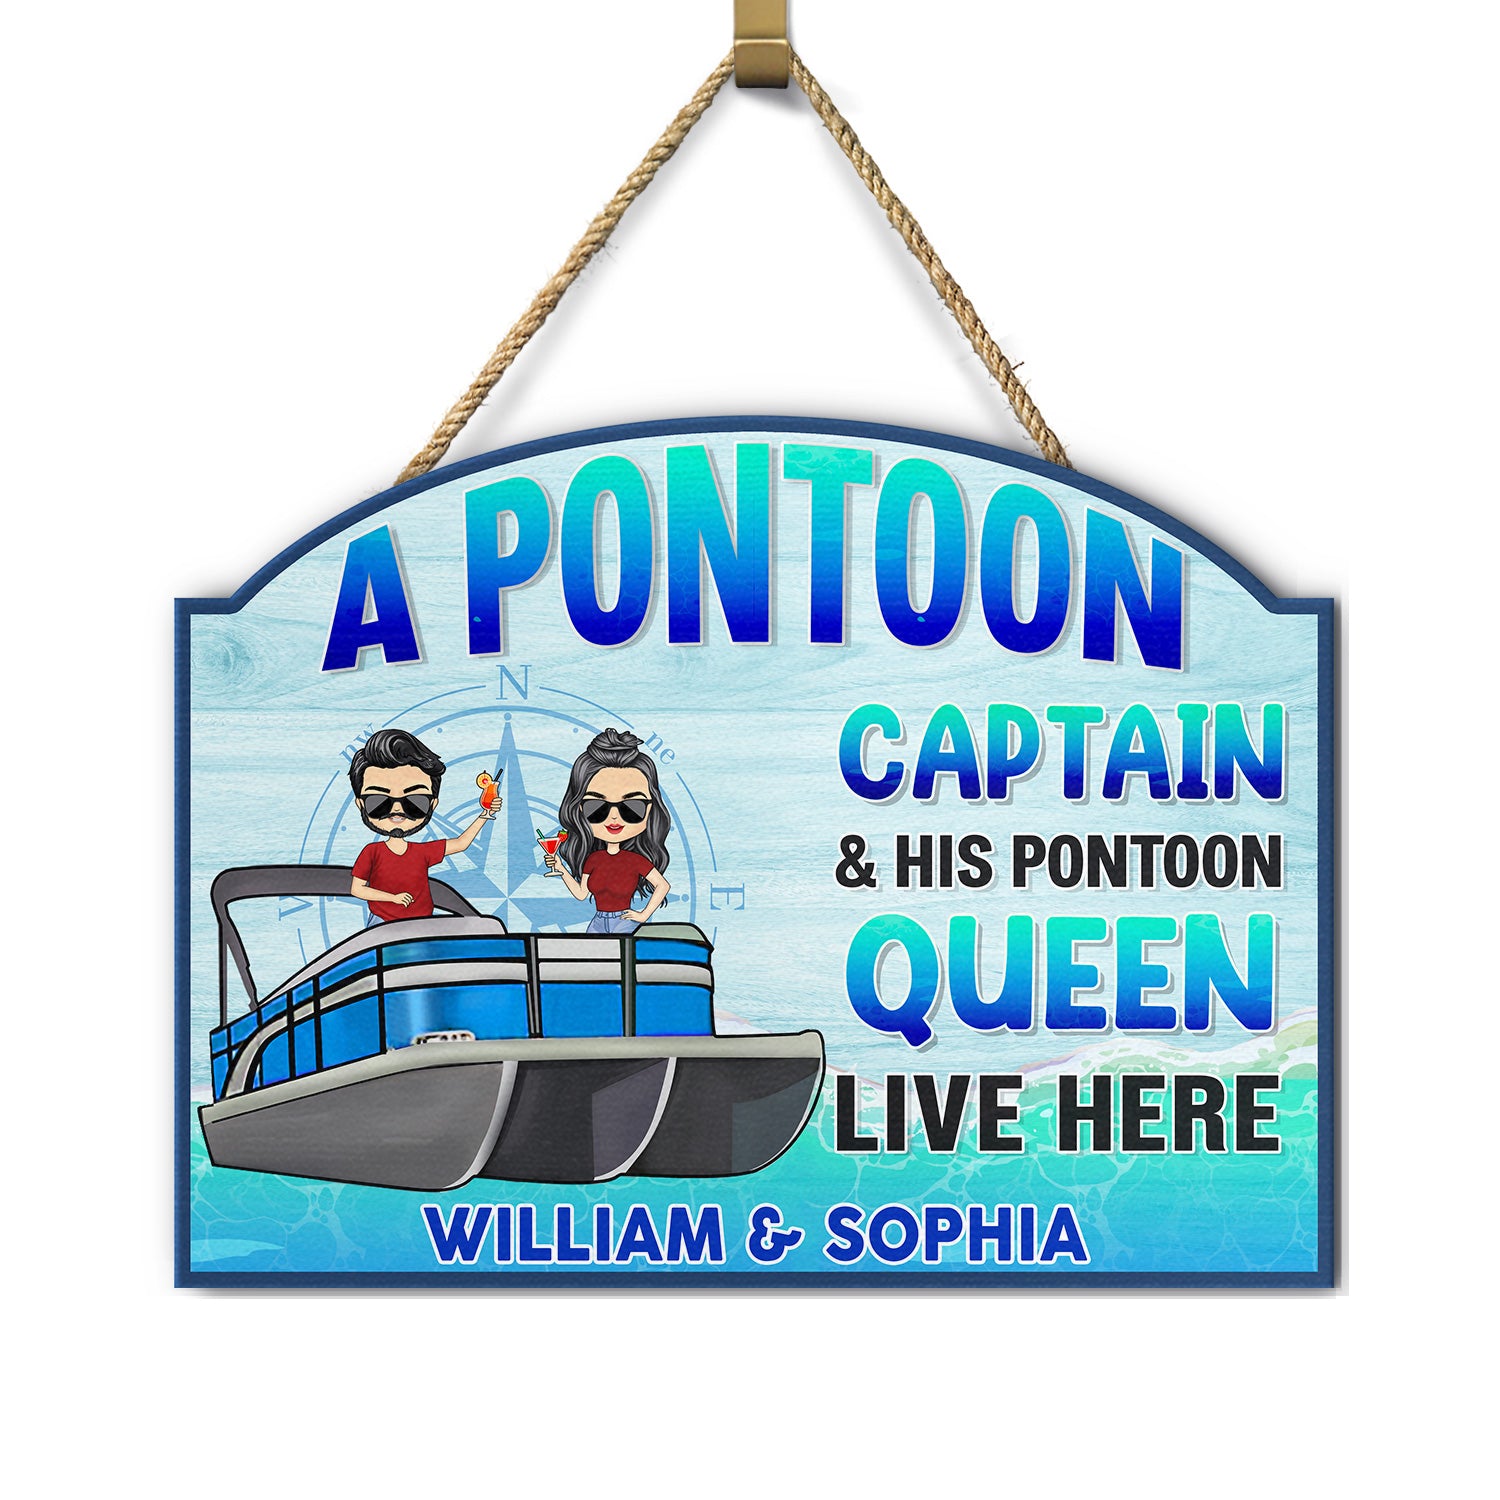 A Pontoon Captain And His Pontoon Queen Live Here - Home Decor, Backyard Decor, Lake House Sign, Gift For Her, Him, Family, Couples, Husband, Wife - Personalized Custom Shaped Wood Sign